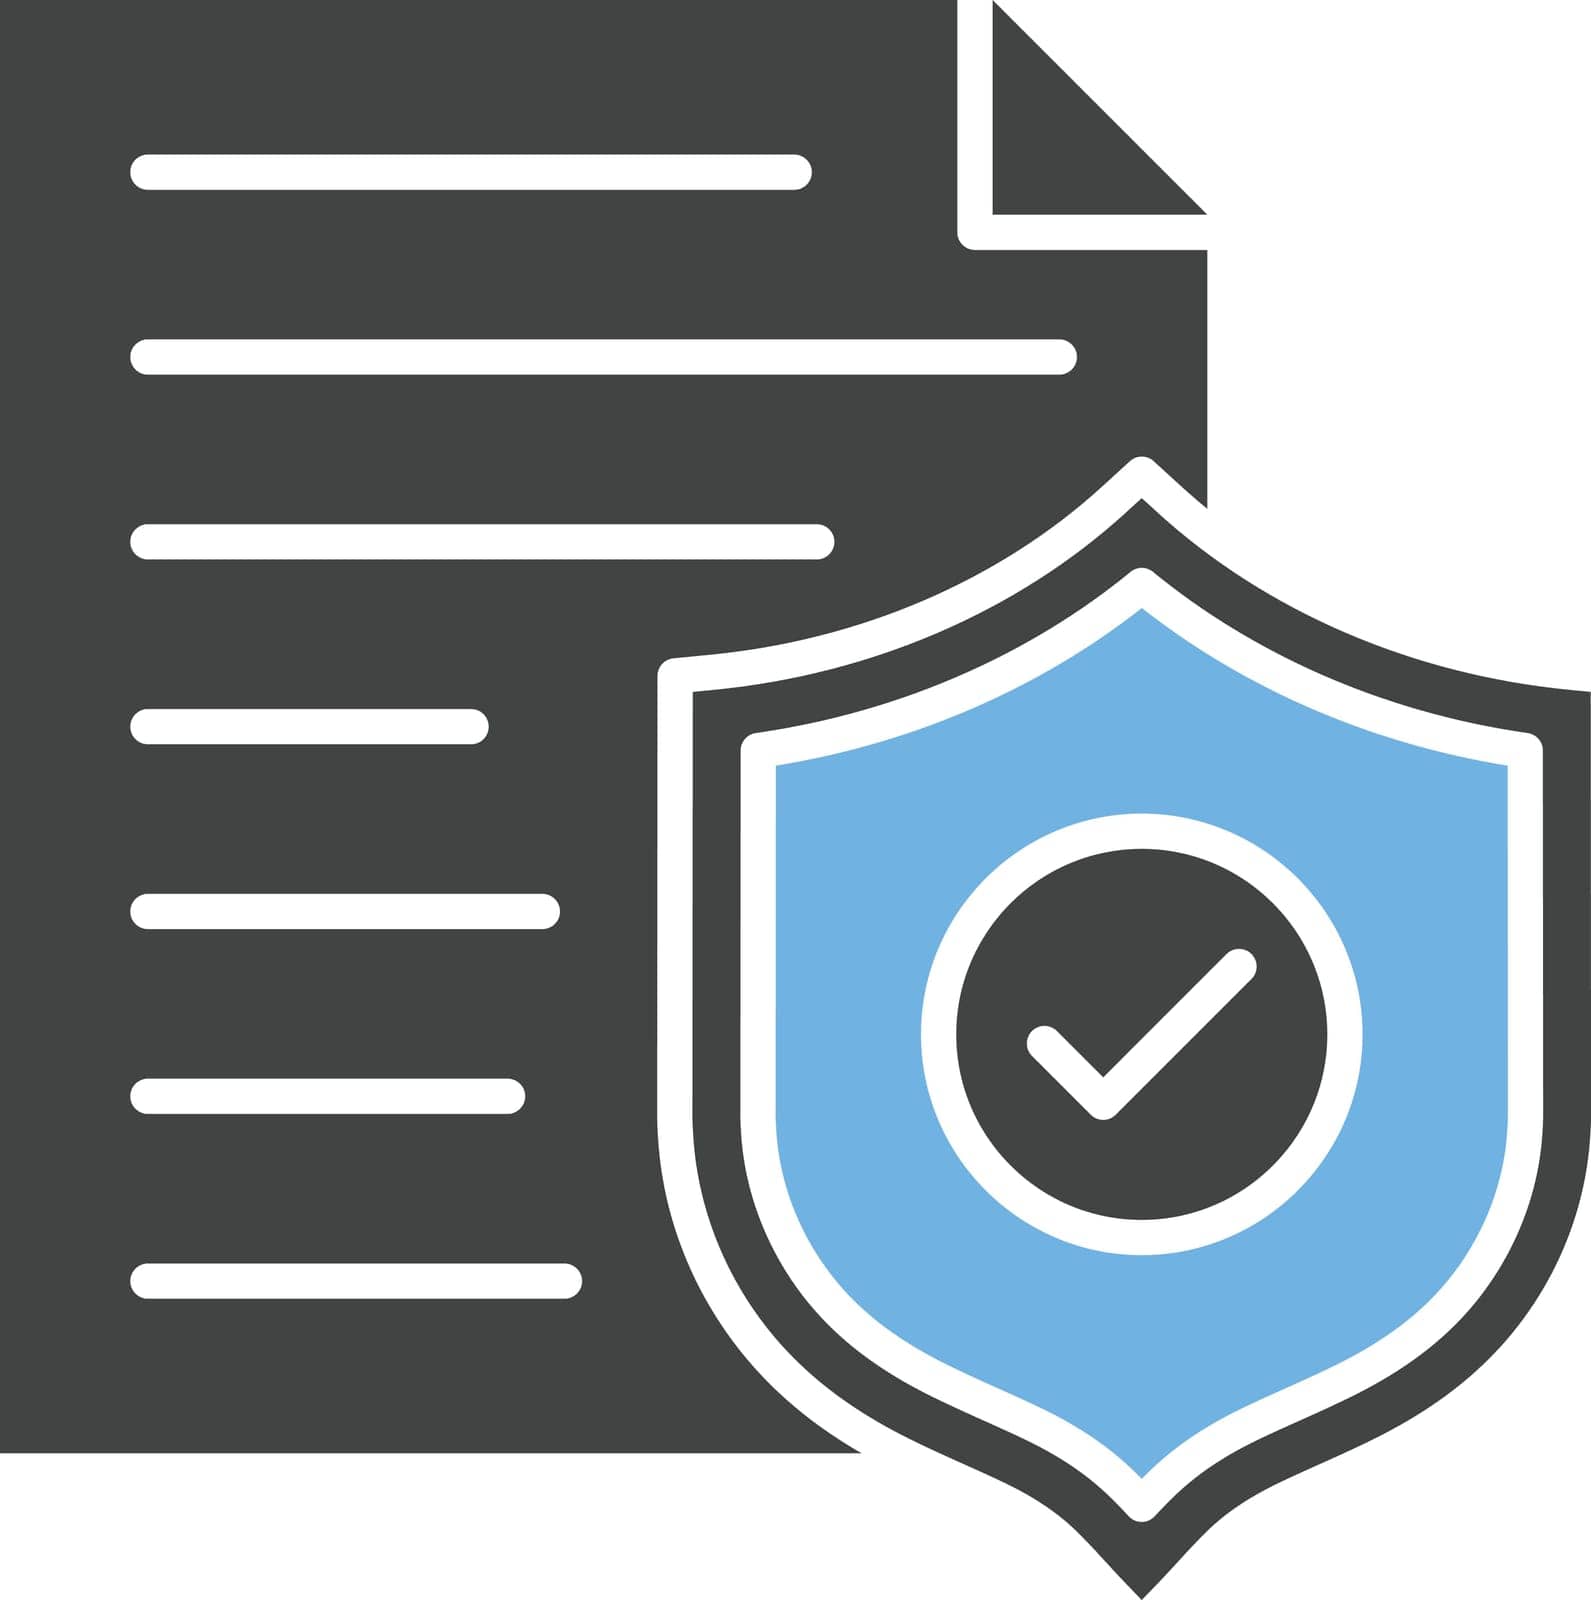 Secure Document icon vector image. Suitable for mobile application web application and print media.